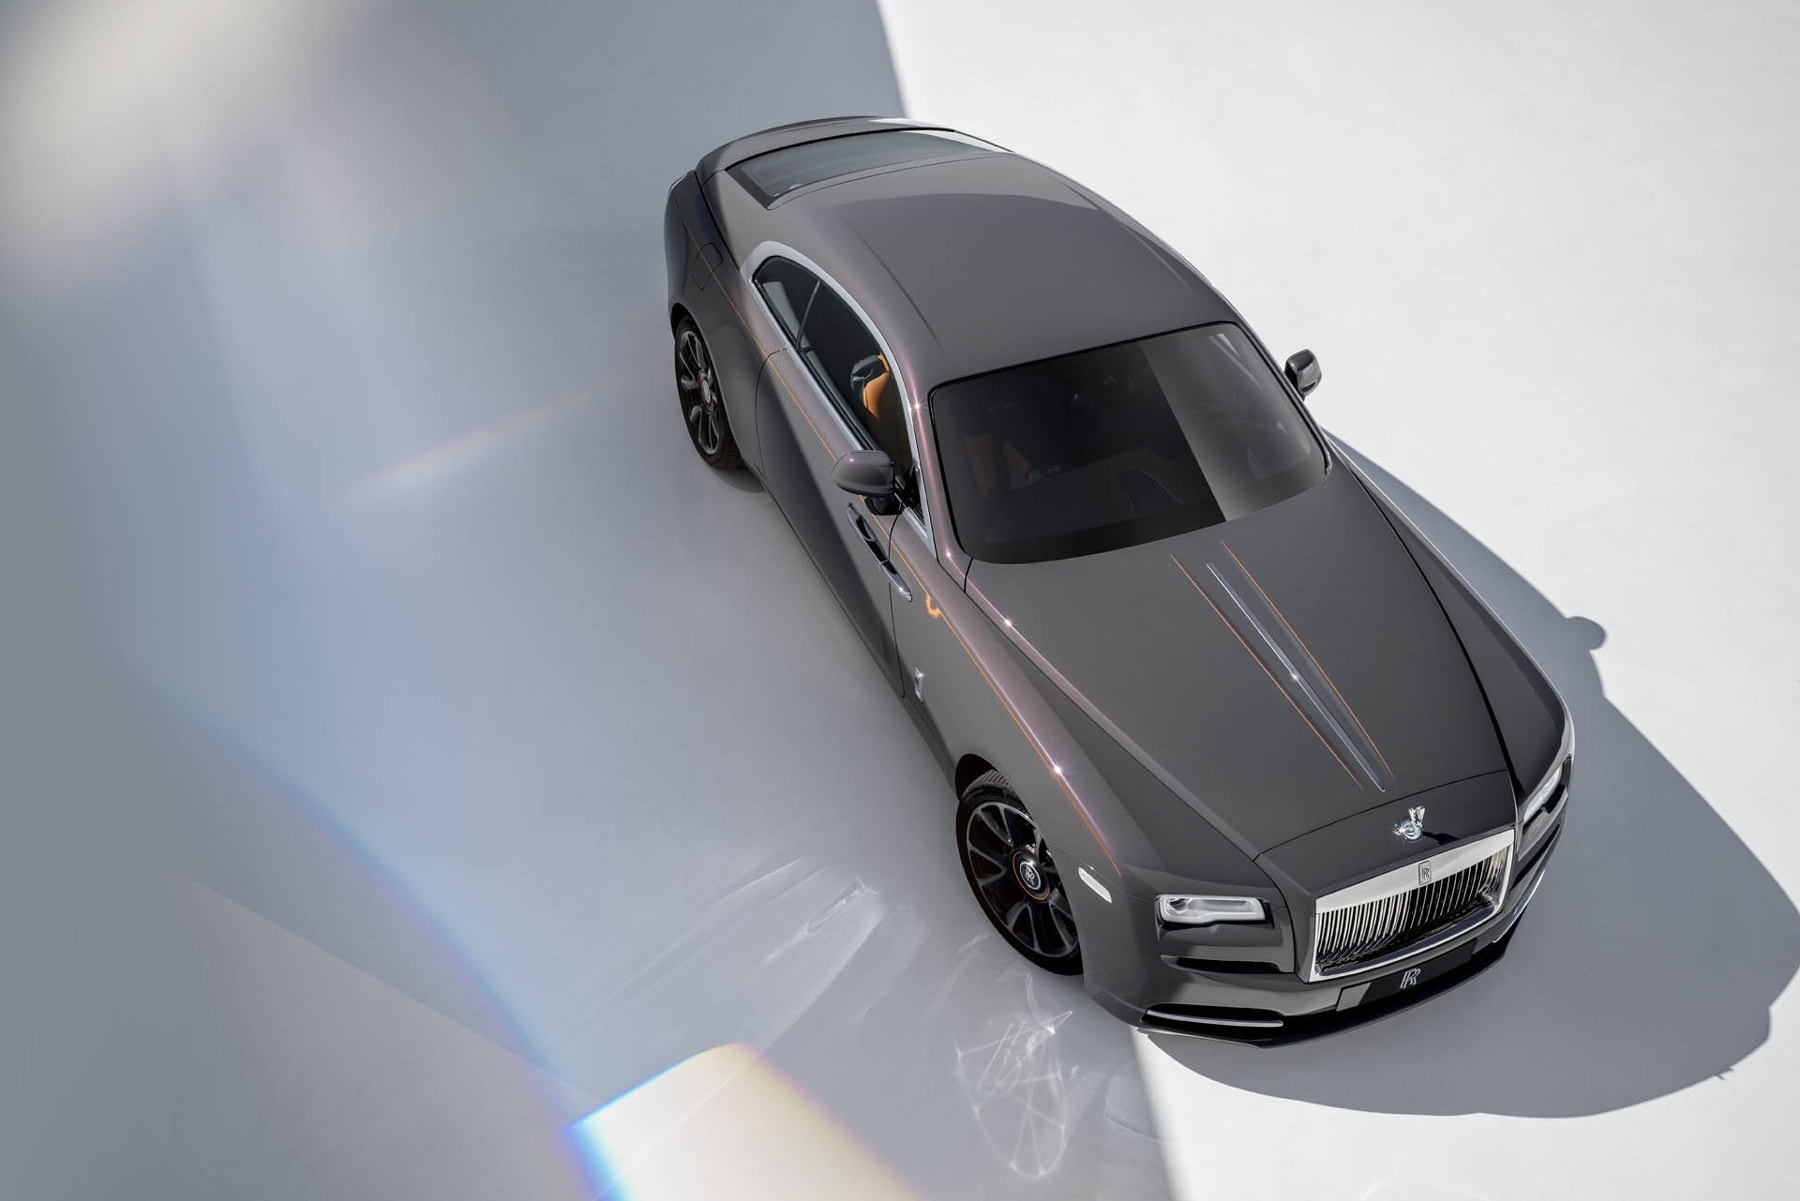 Rolls Royce Wraith Luminary Edition 2018 2019 release date info drop debut